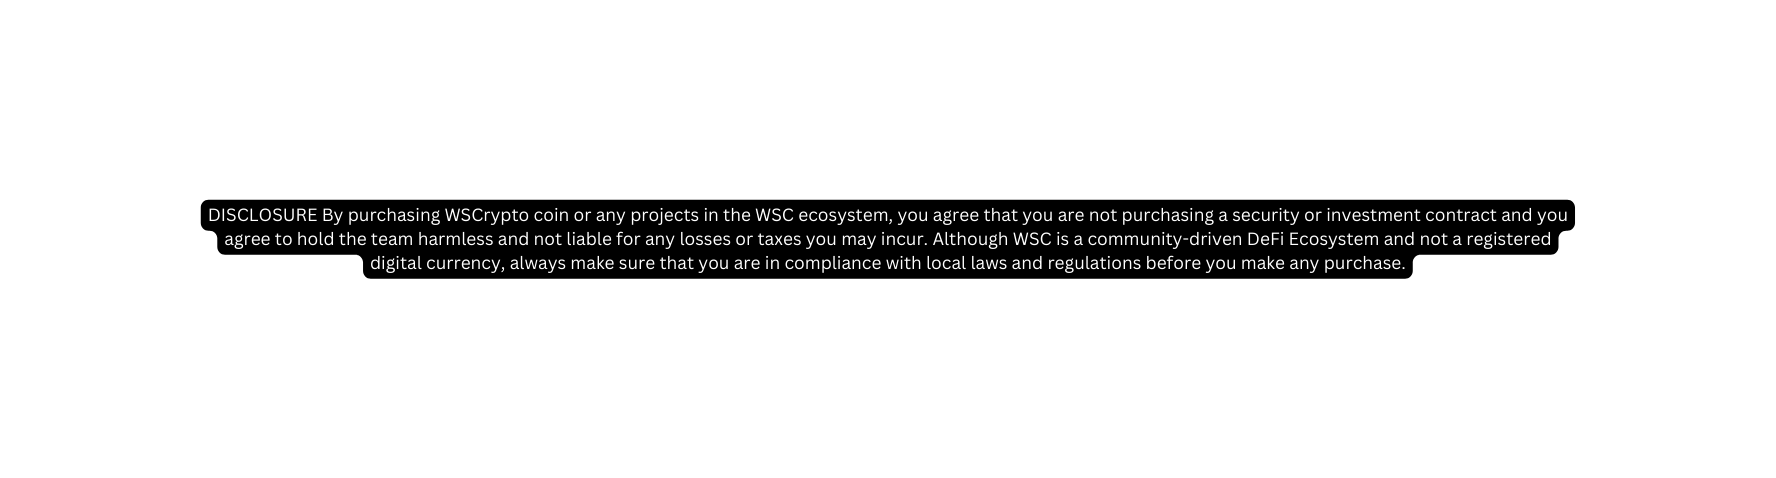 DISCLOSURE By purchasing WSCrypto coin or any projects in the WSC ecosystem you agree that you are not purchasing a security or investment contract and you agree to hold the team harmless and not liable for any losses or taxes you may incur Although WSC is a community driven DeFi Ecosystem and not a registered digital currency always make sure that you are in compliance with local laws and regulations before you make any purchase